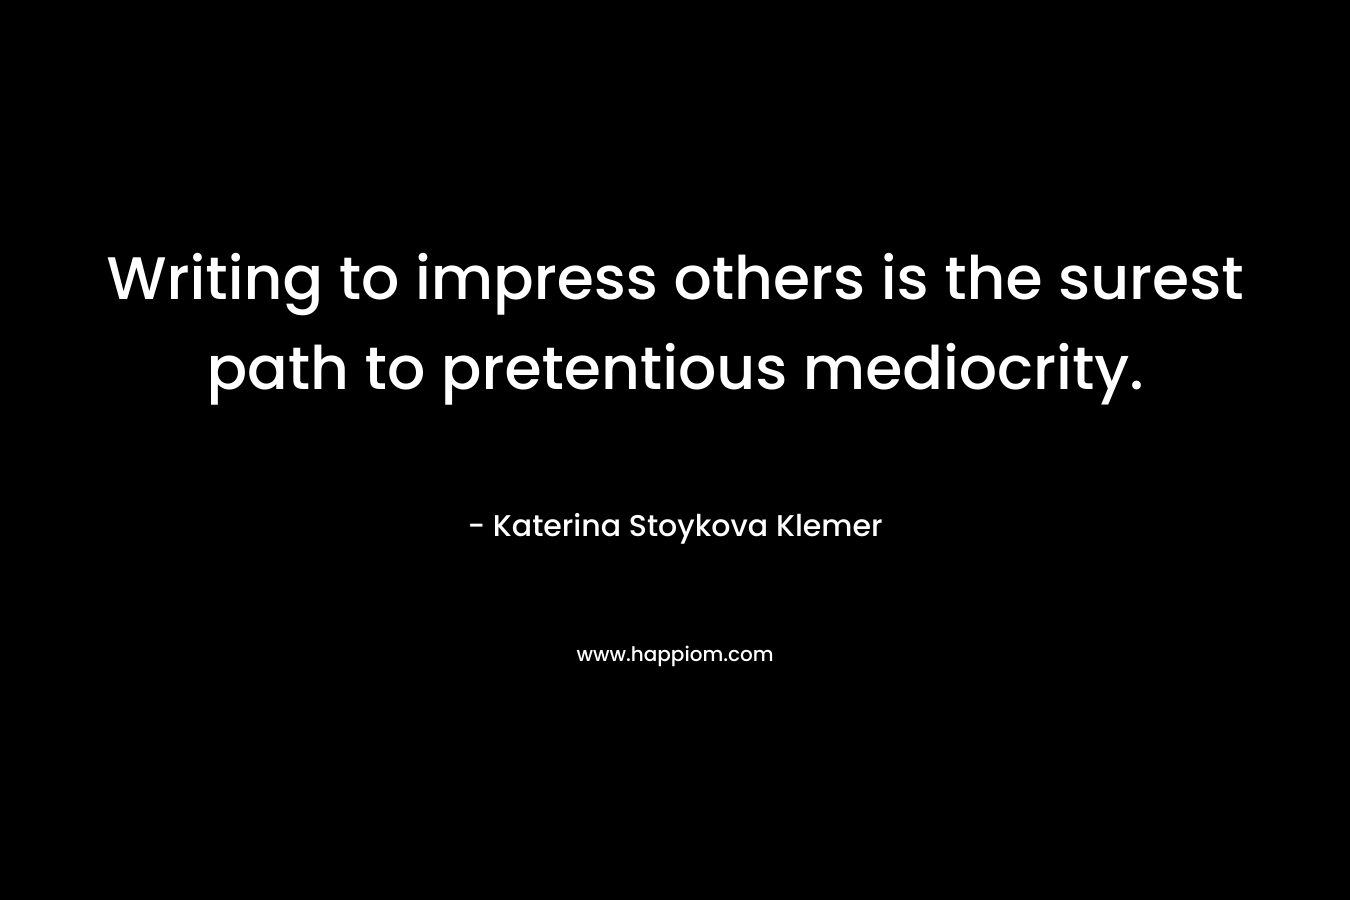 Writing to impress others is the surest path to pretentious mediocrity. – Katerina Stoykova Klemer